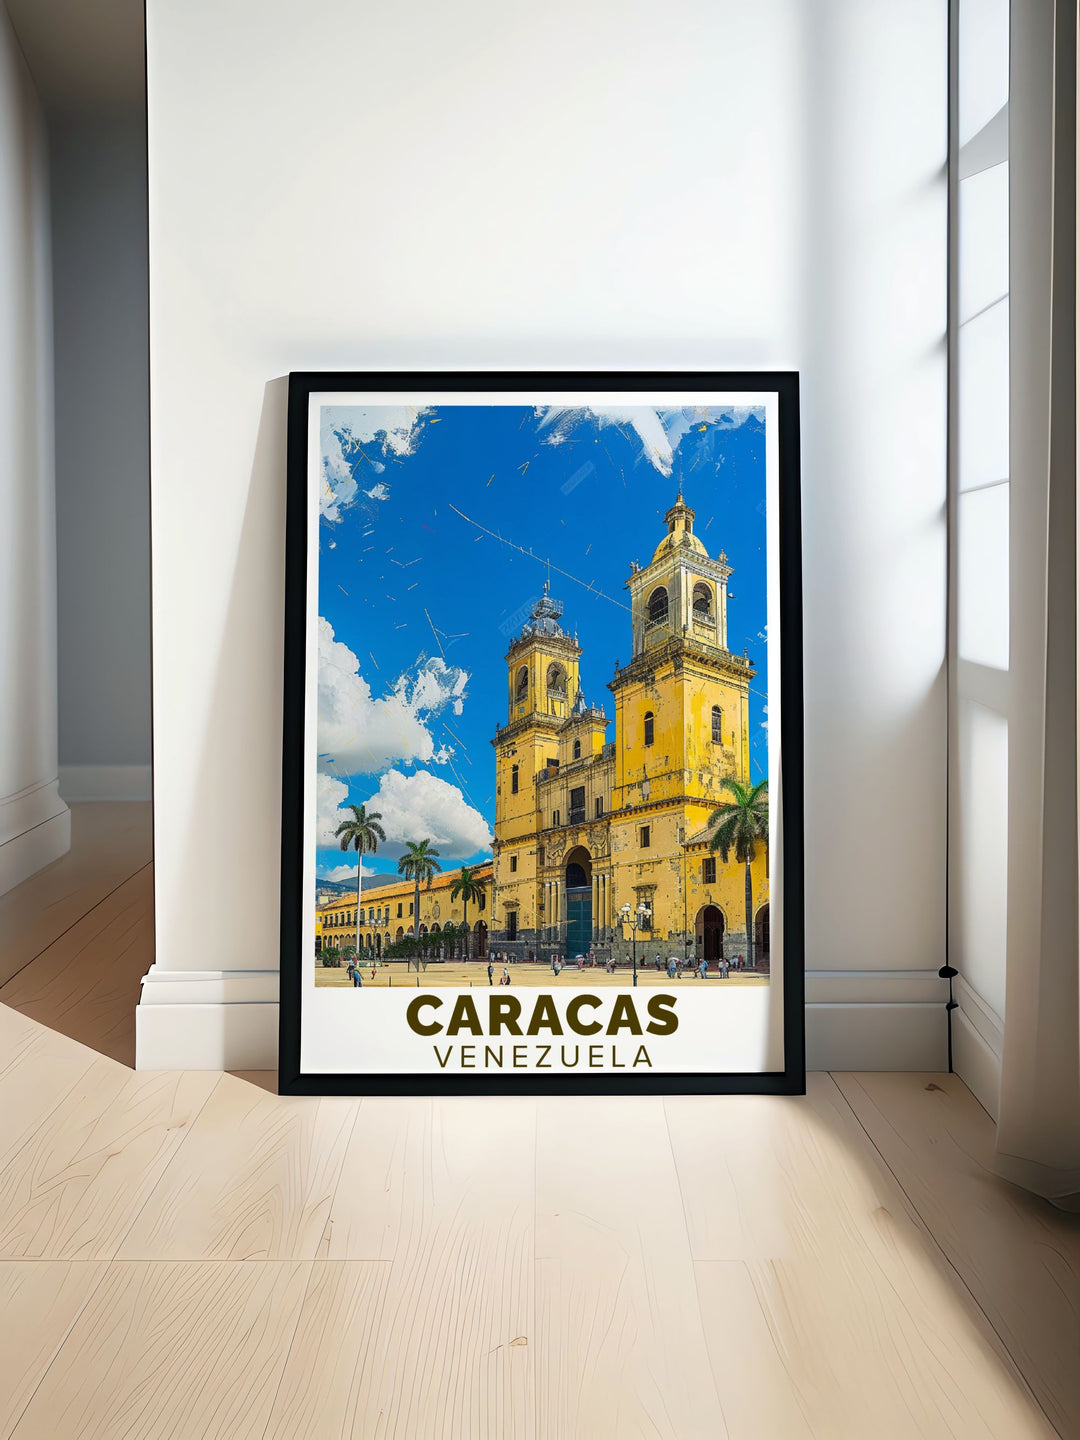 The captivating blend of historical landmarks and lively urban scenes in Caracas and Plaza Bolivar is beautifully illustrated in this poster, making it a stunning addition to any wall art collection celebrating Venezuela.